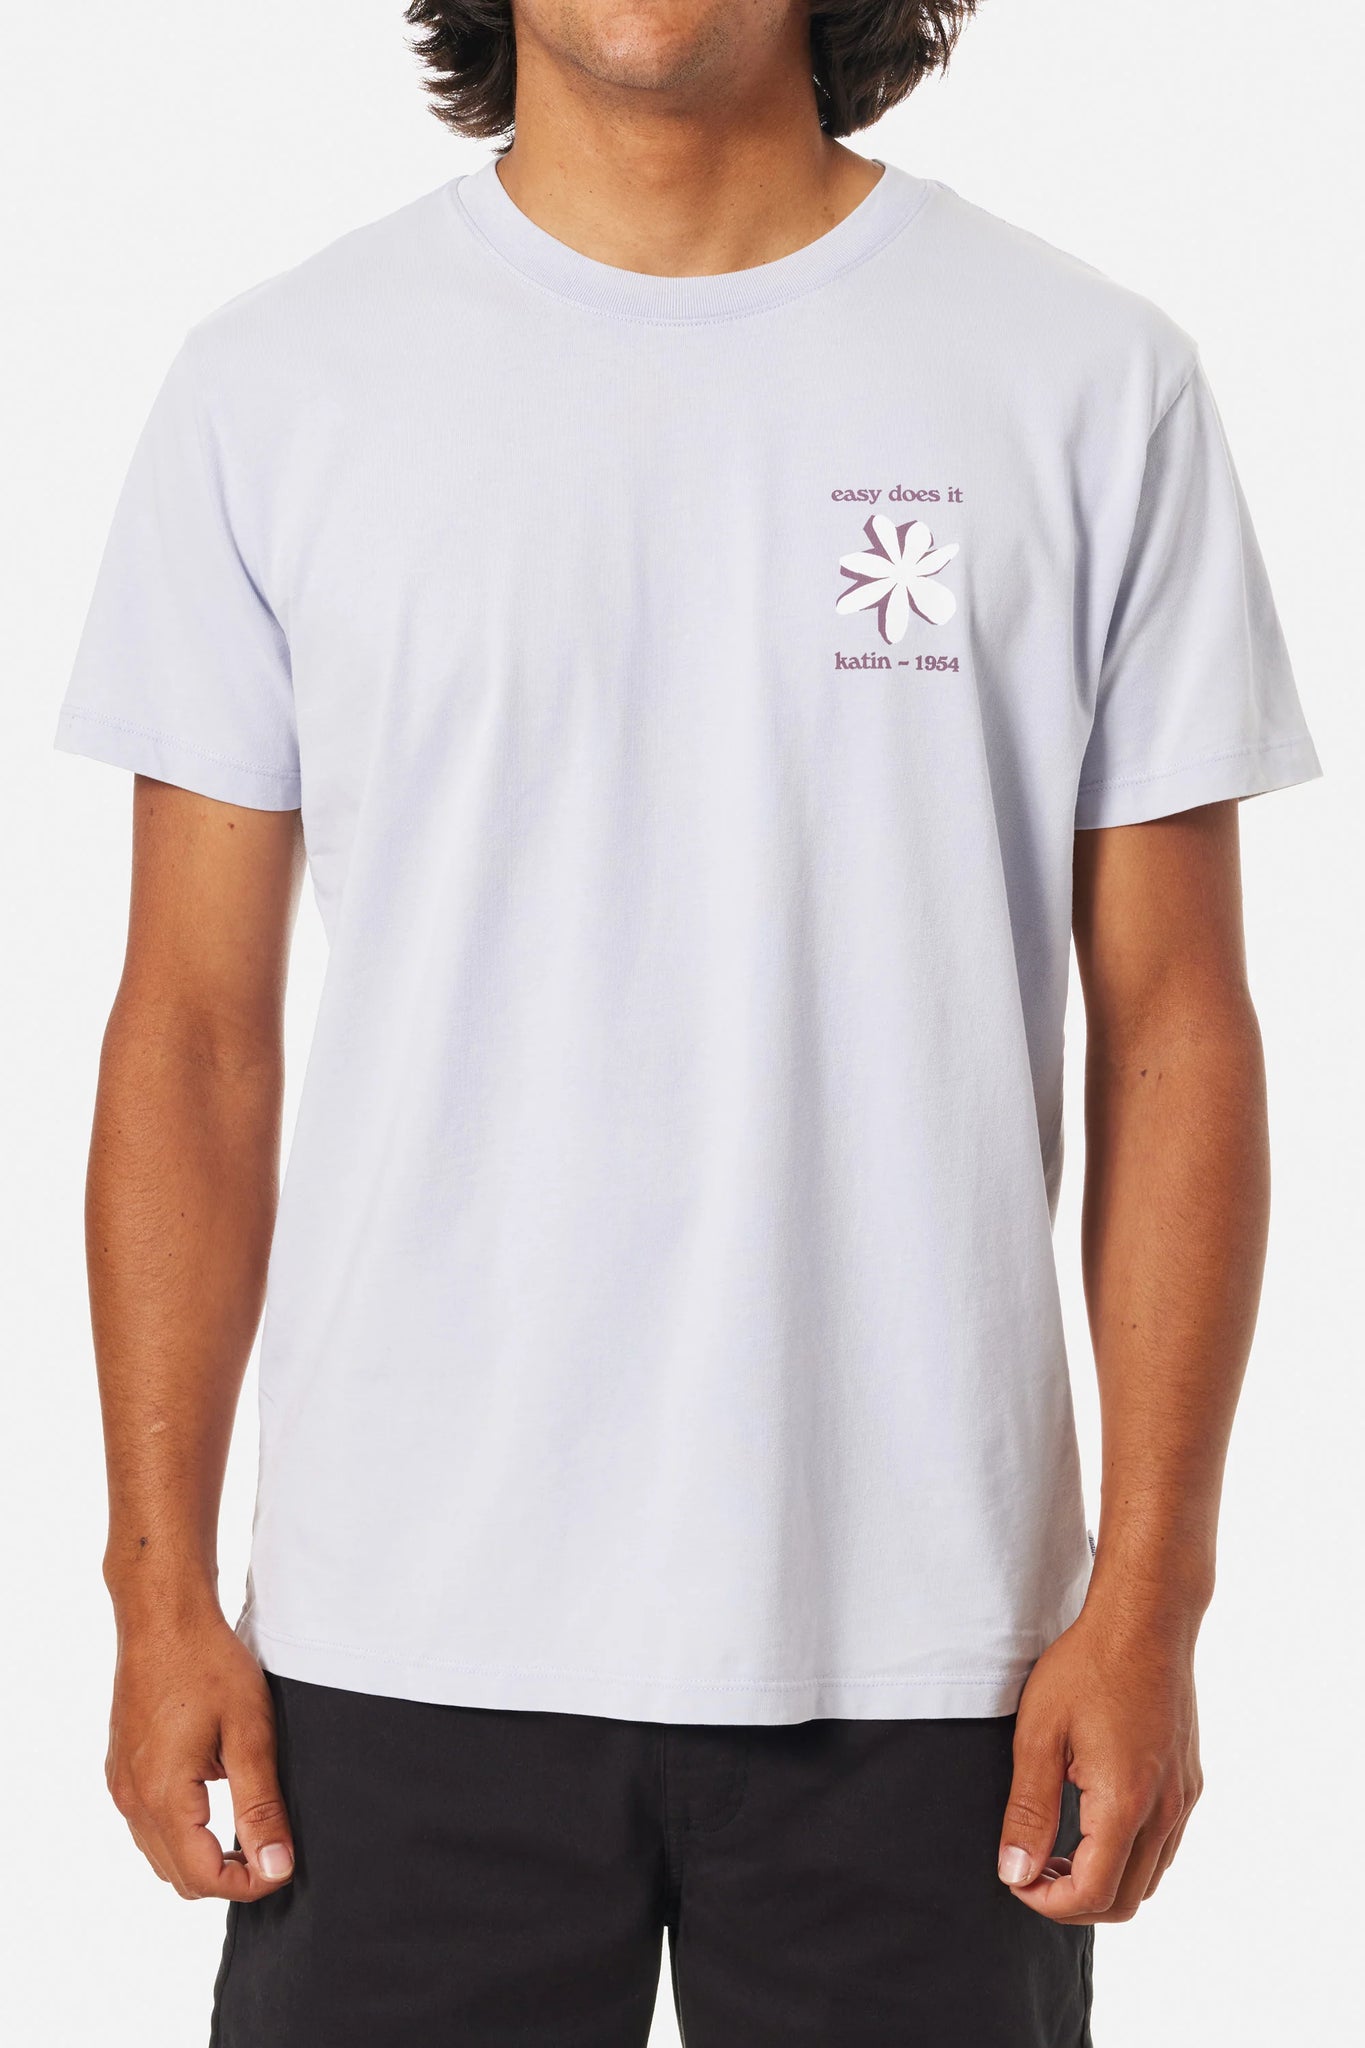 Katin USA - Flow Tee - all things being eco chilliwack canada - men's clothing and accessories store - organic cotton menswear